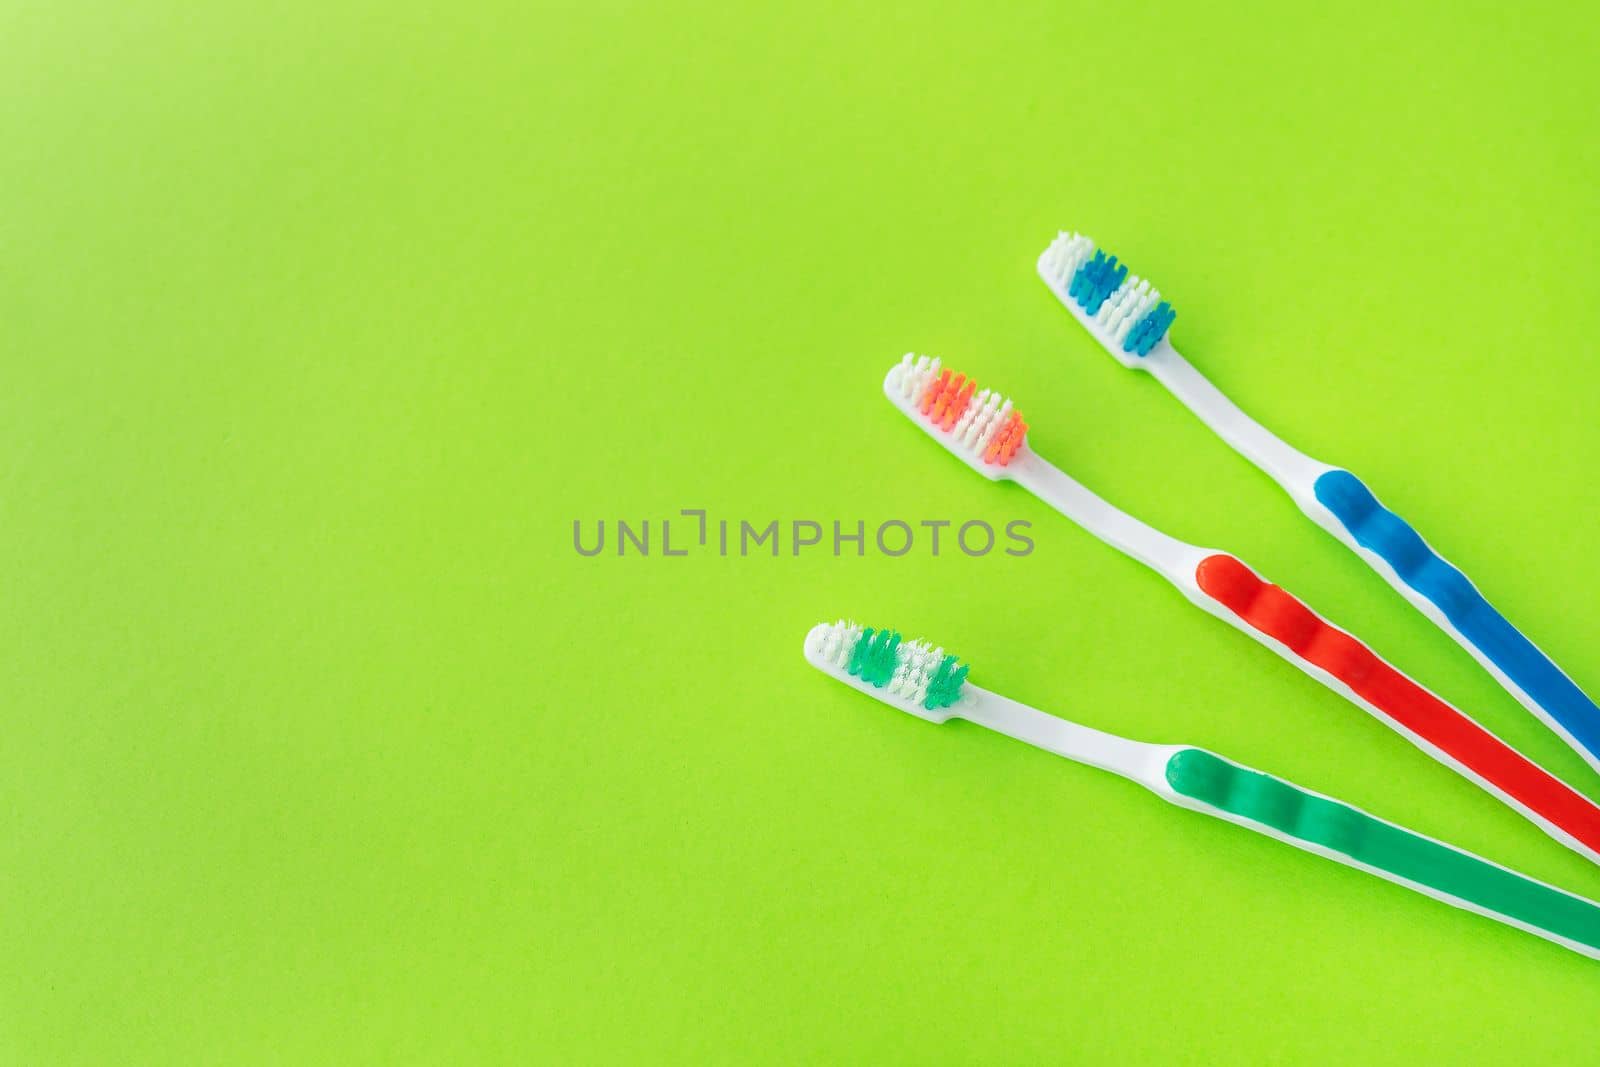 Multicolored toothbrushes on a green background, the concept of dental care and oral hygiene. Place for an inscription. by sfinks